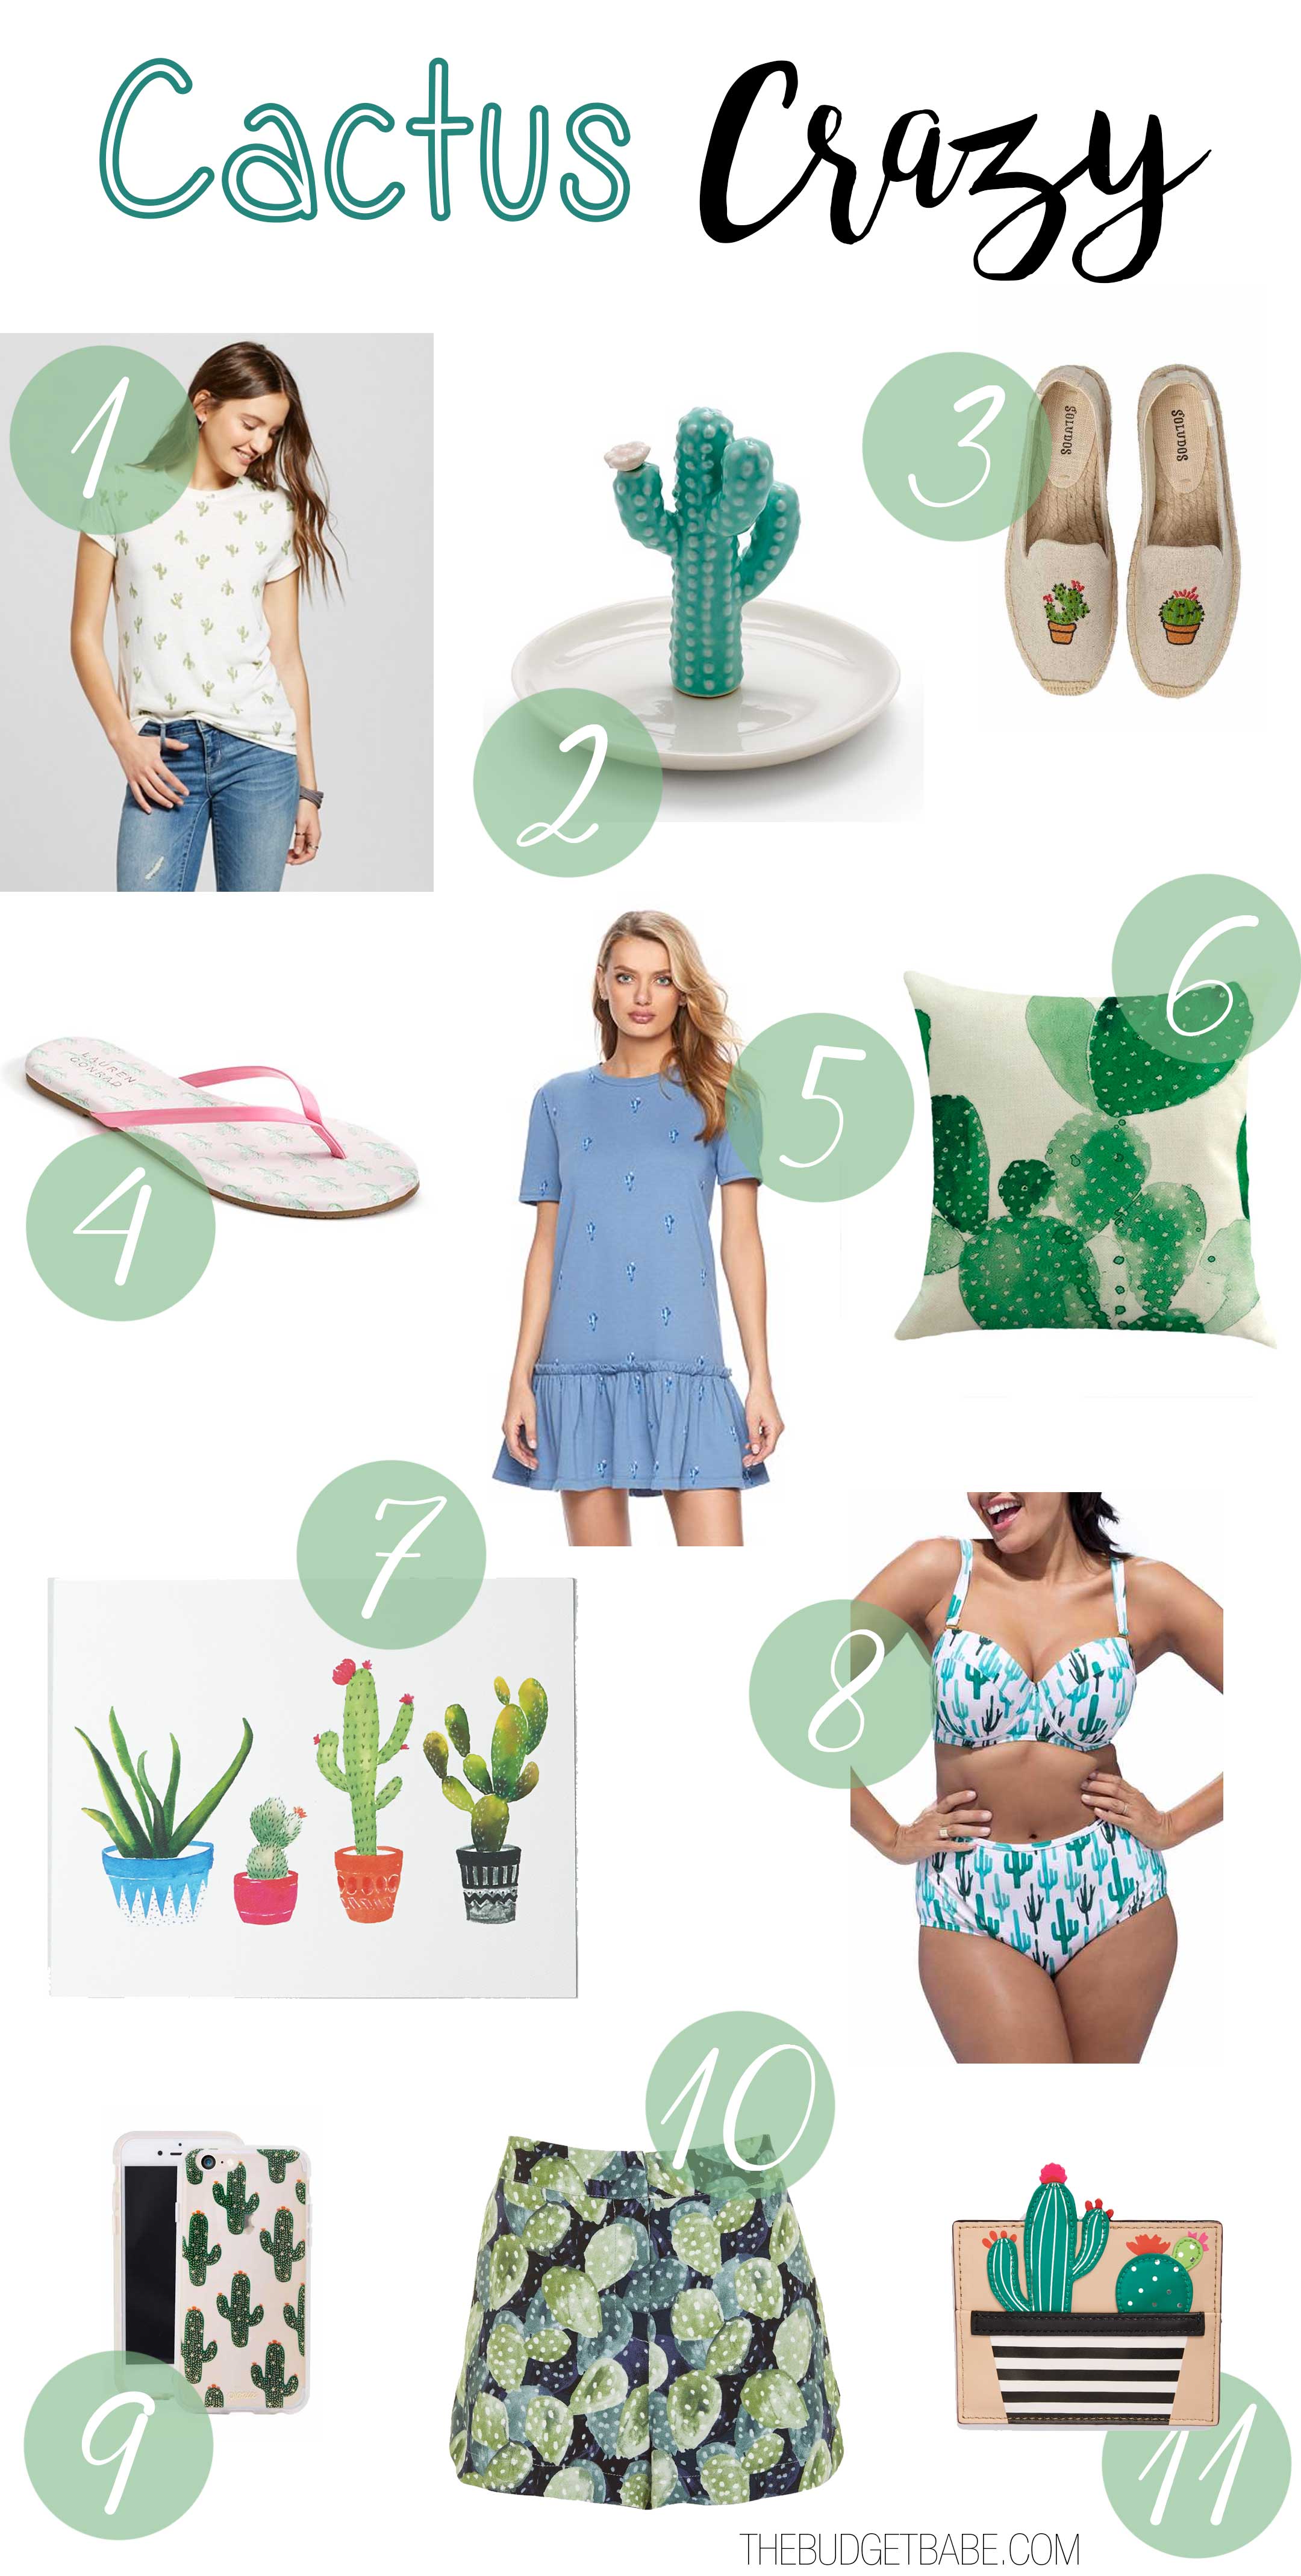 We're crazy for cactus themed fashions and decor.